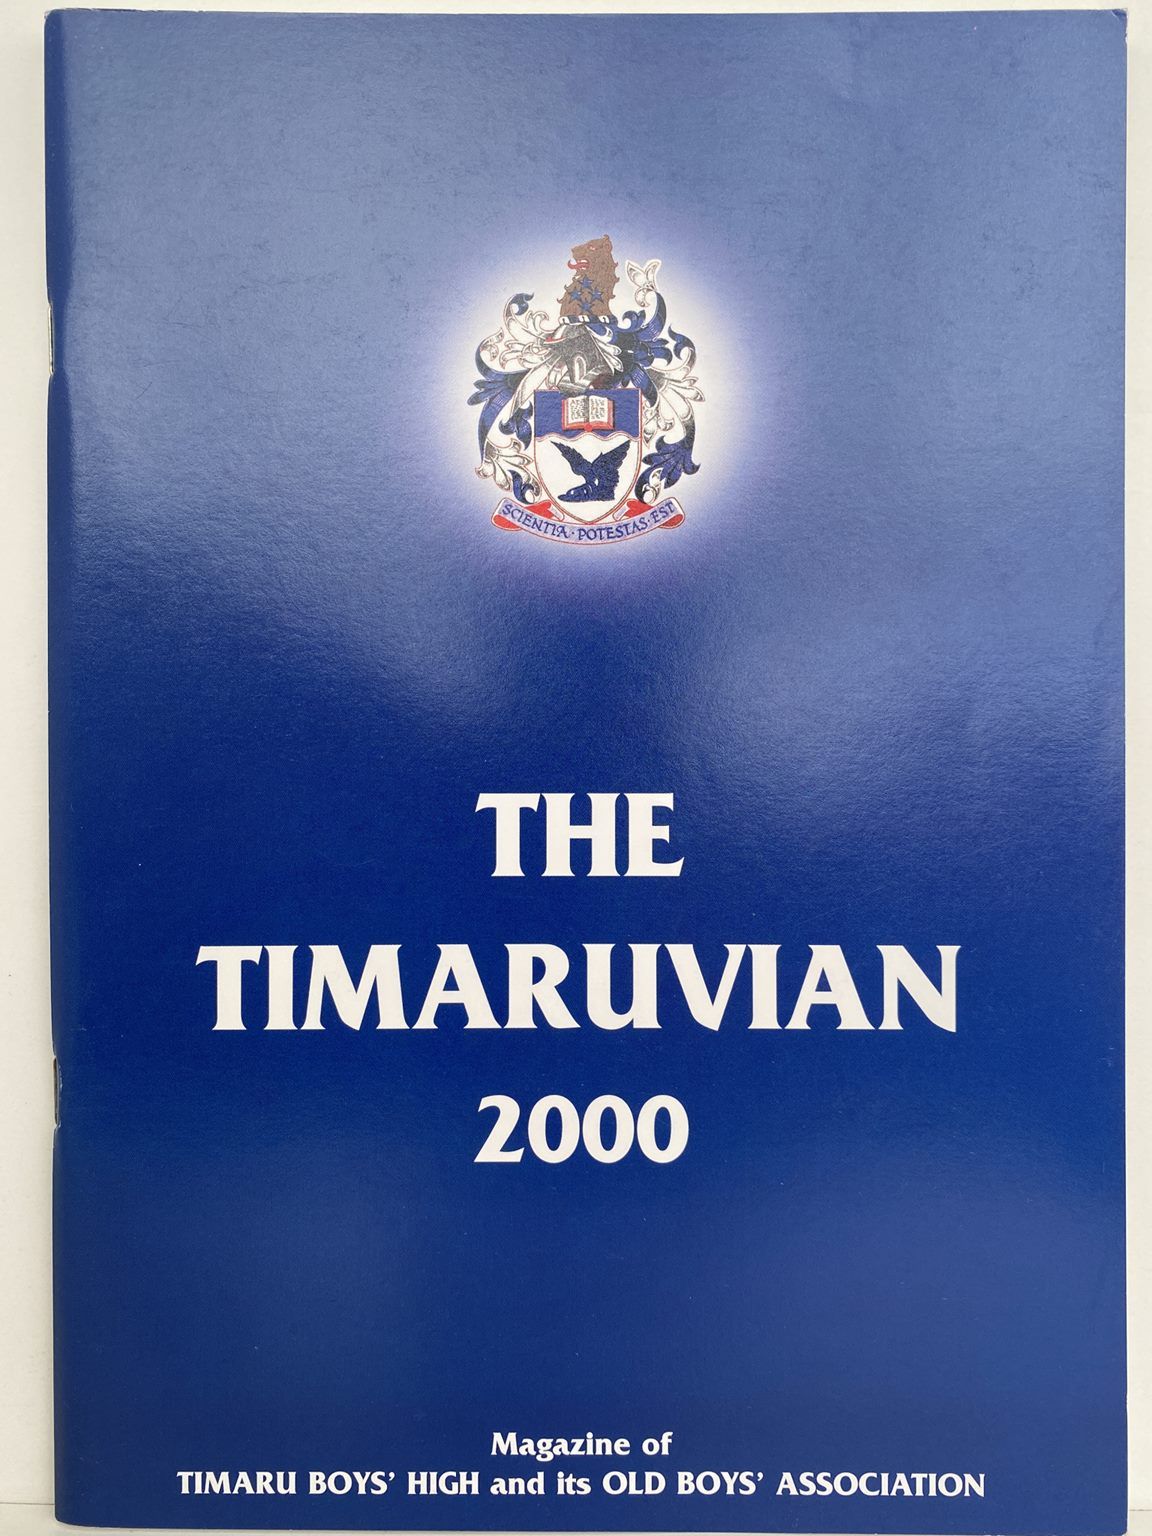 THE TIMARUVIAN: Magazine of the Timaru Boys High School and its Old Boys' Association 2000